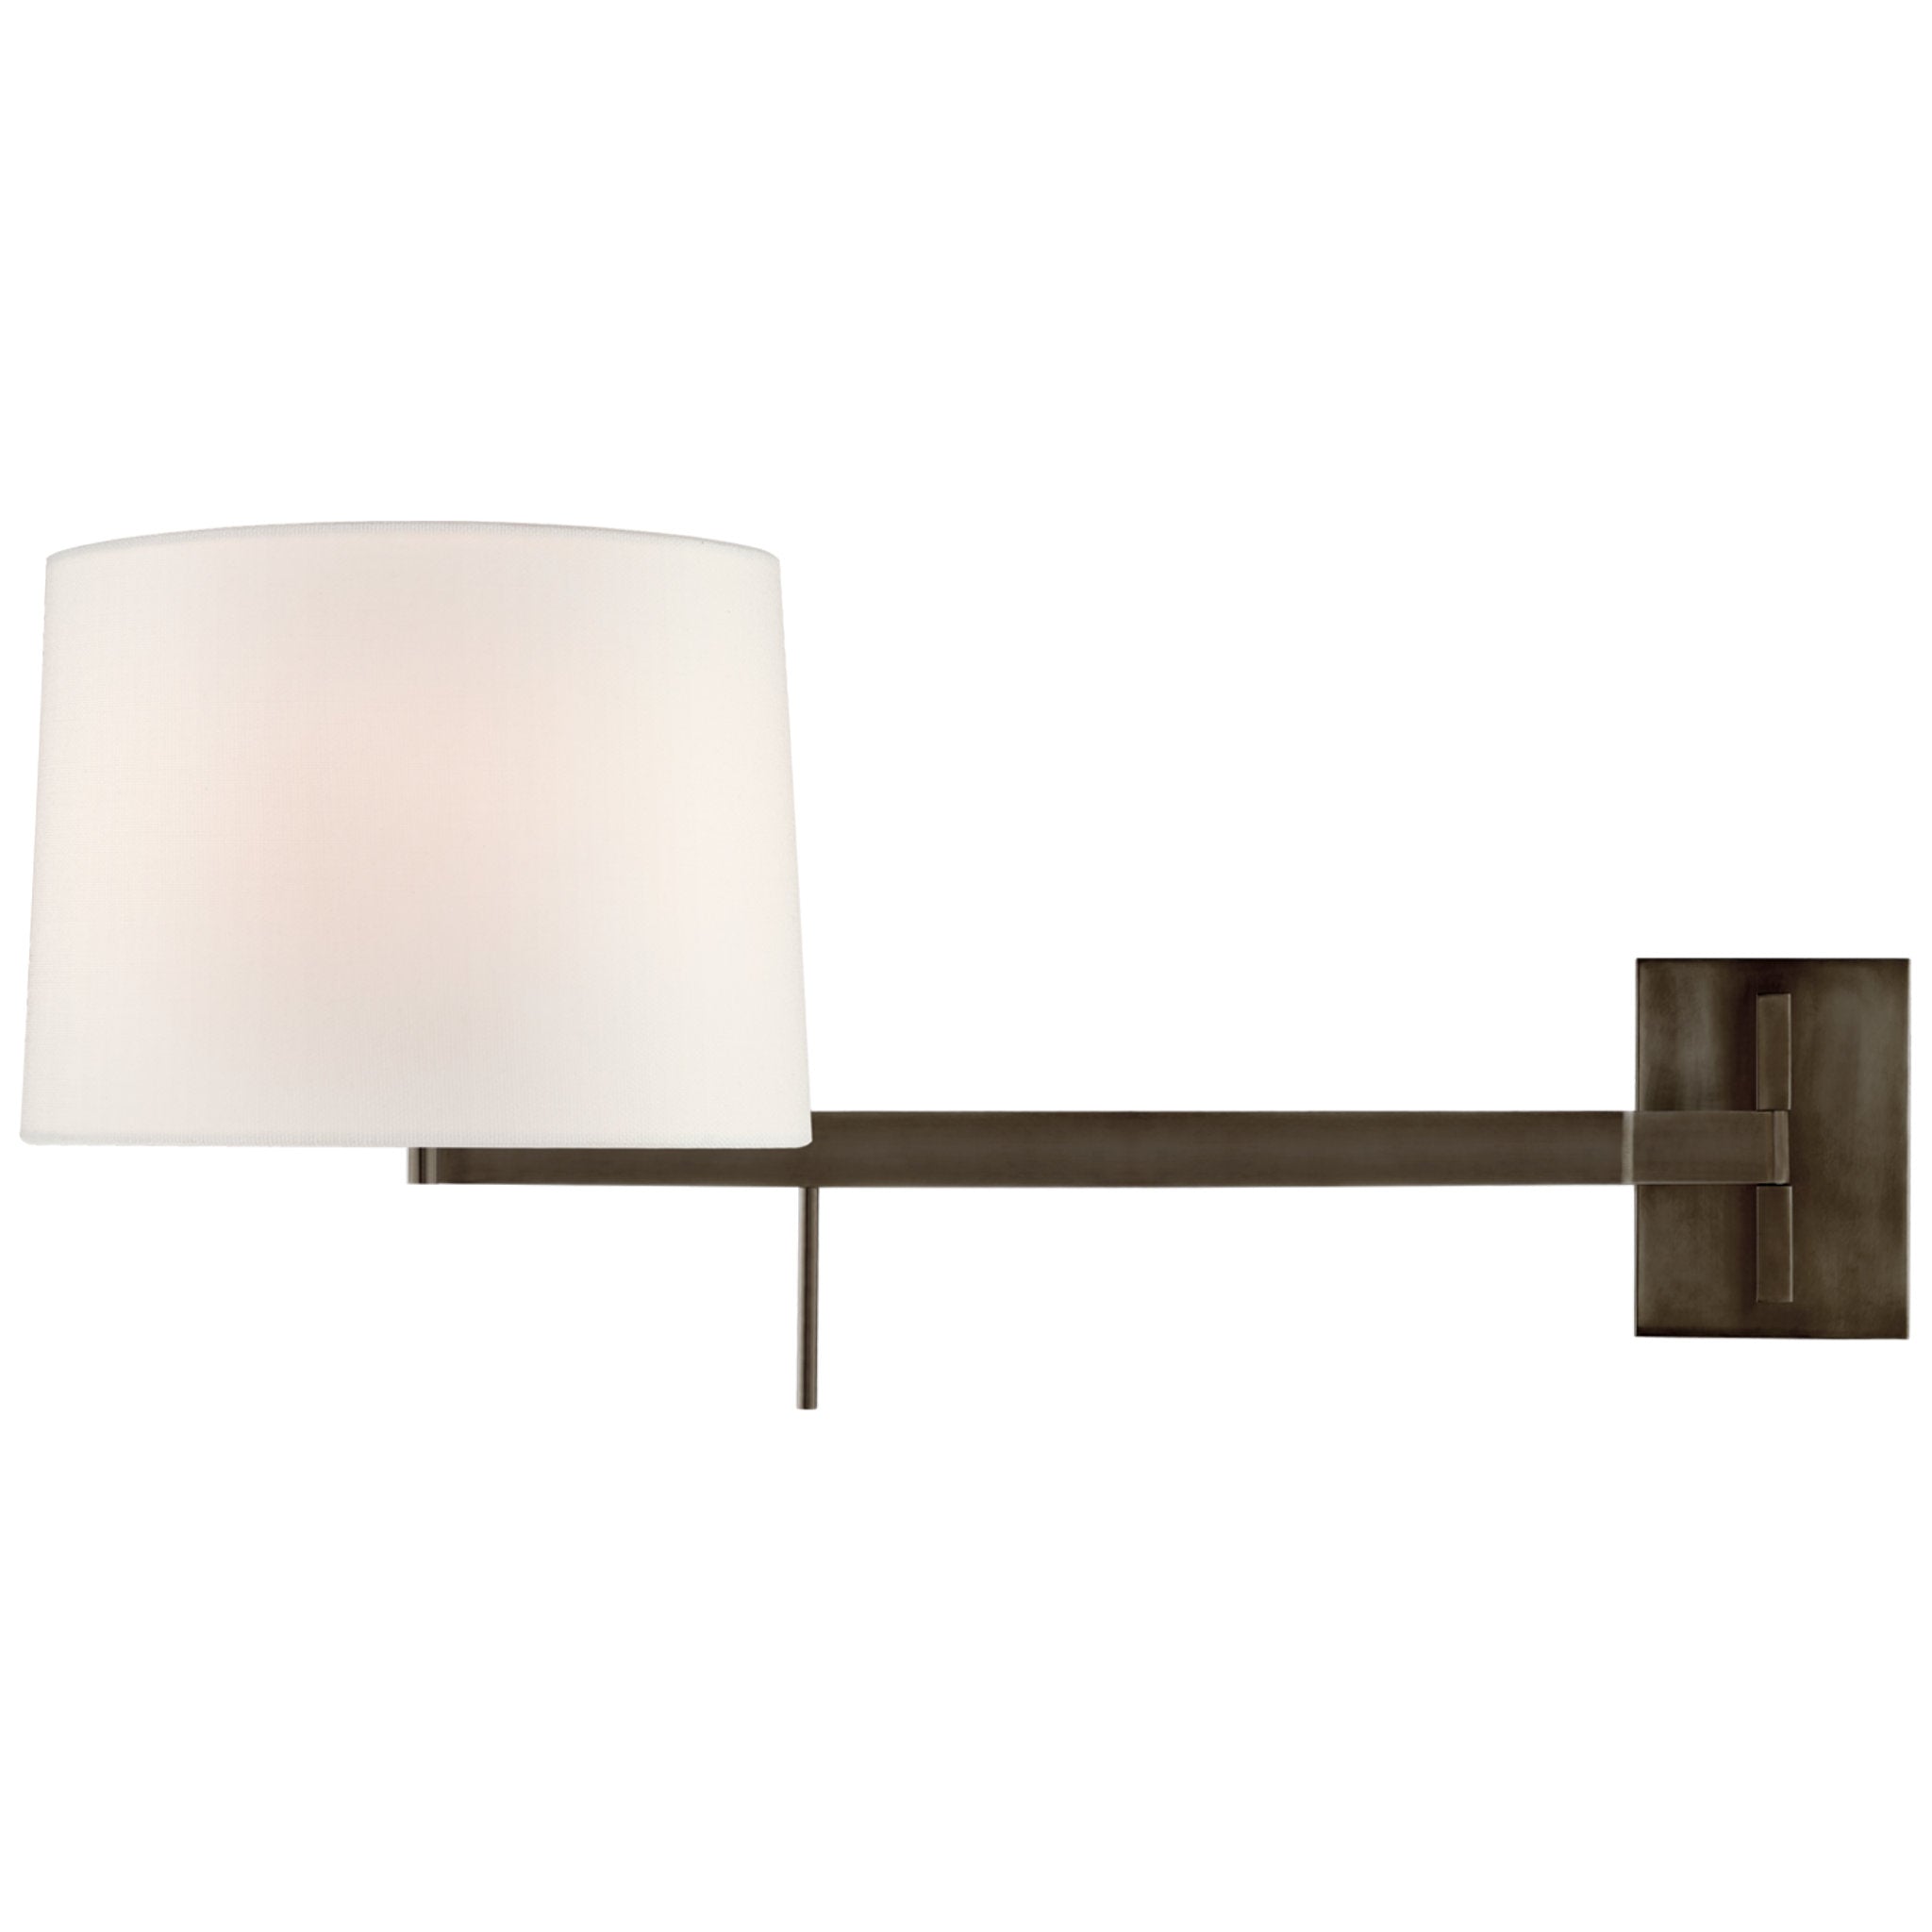 Barbara Barry Sweep Medium Right Articulating Sconce in Bronze with Linen Shade